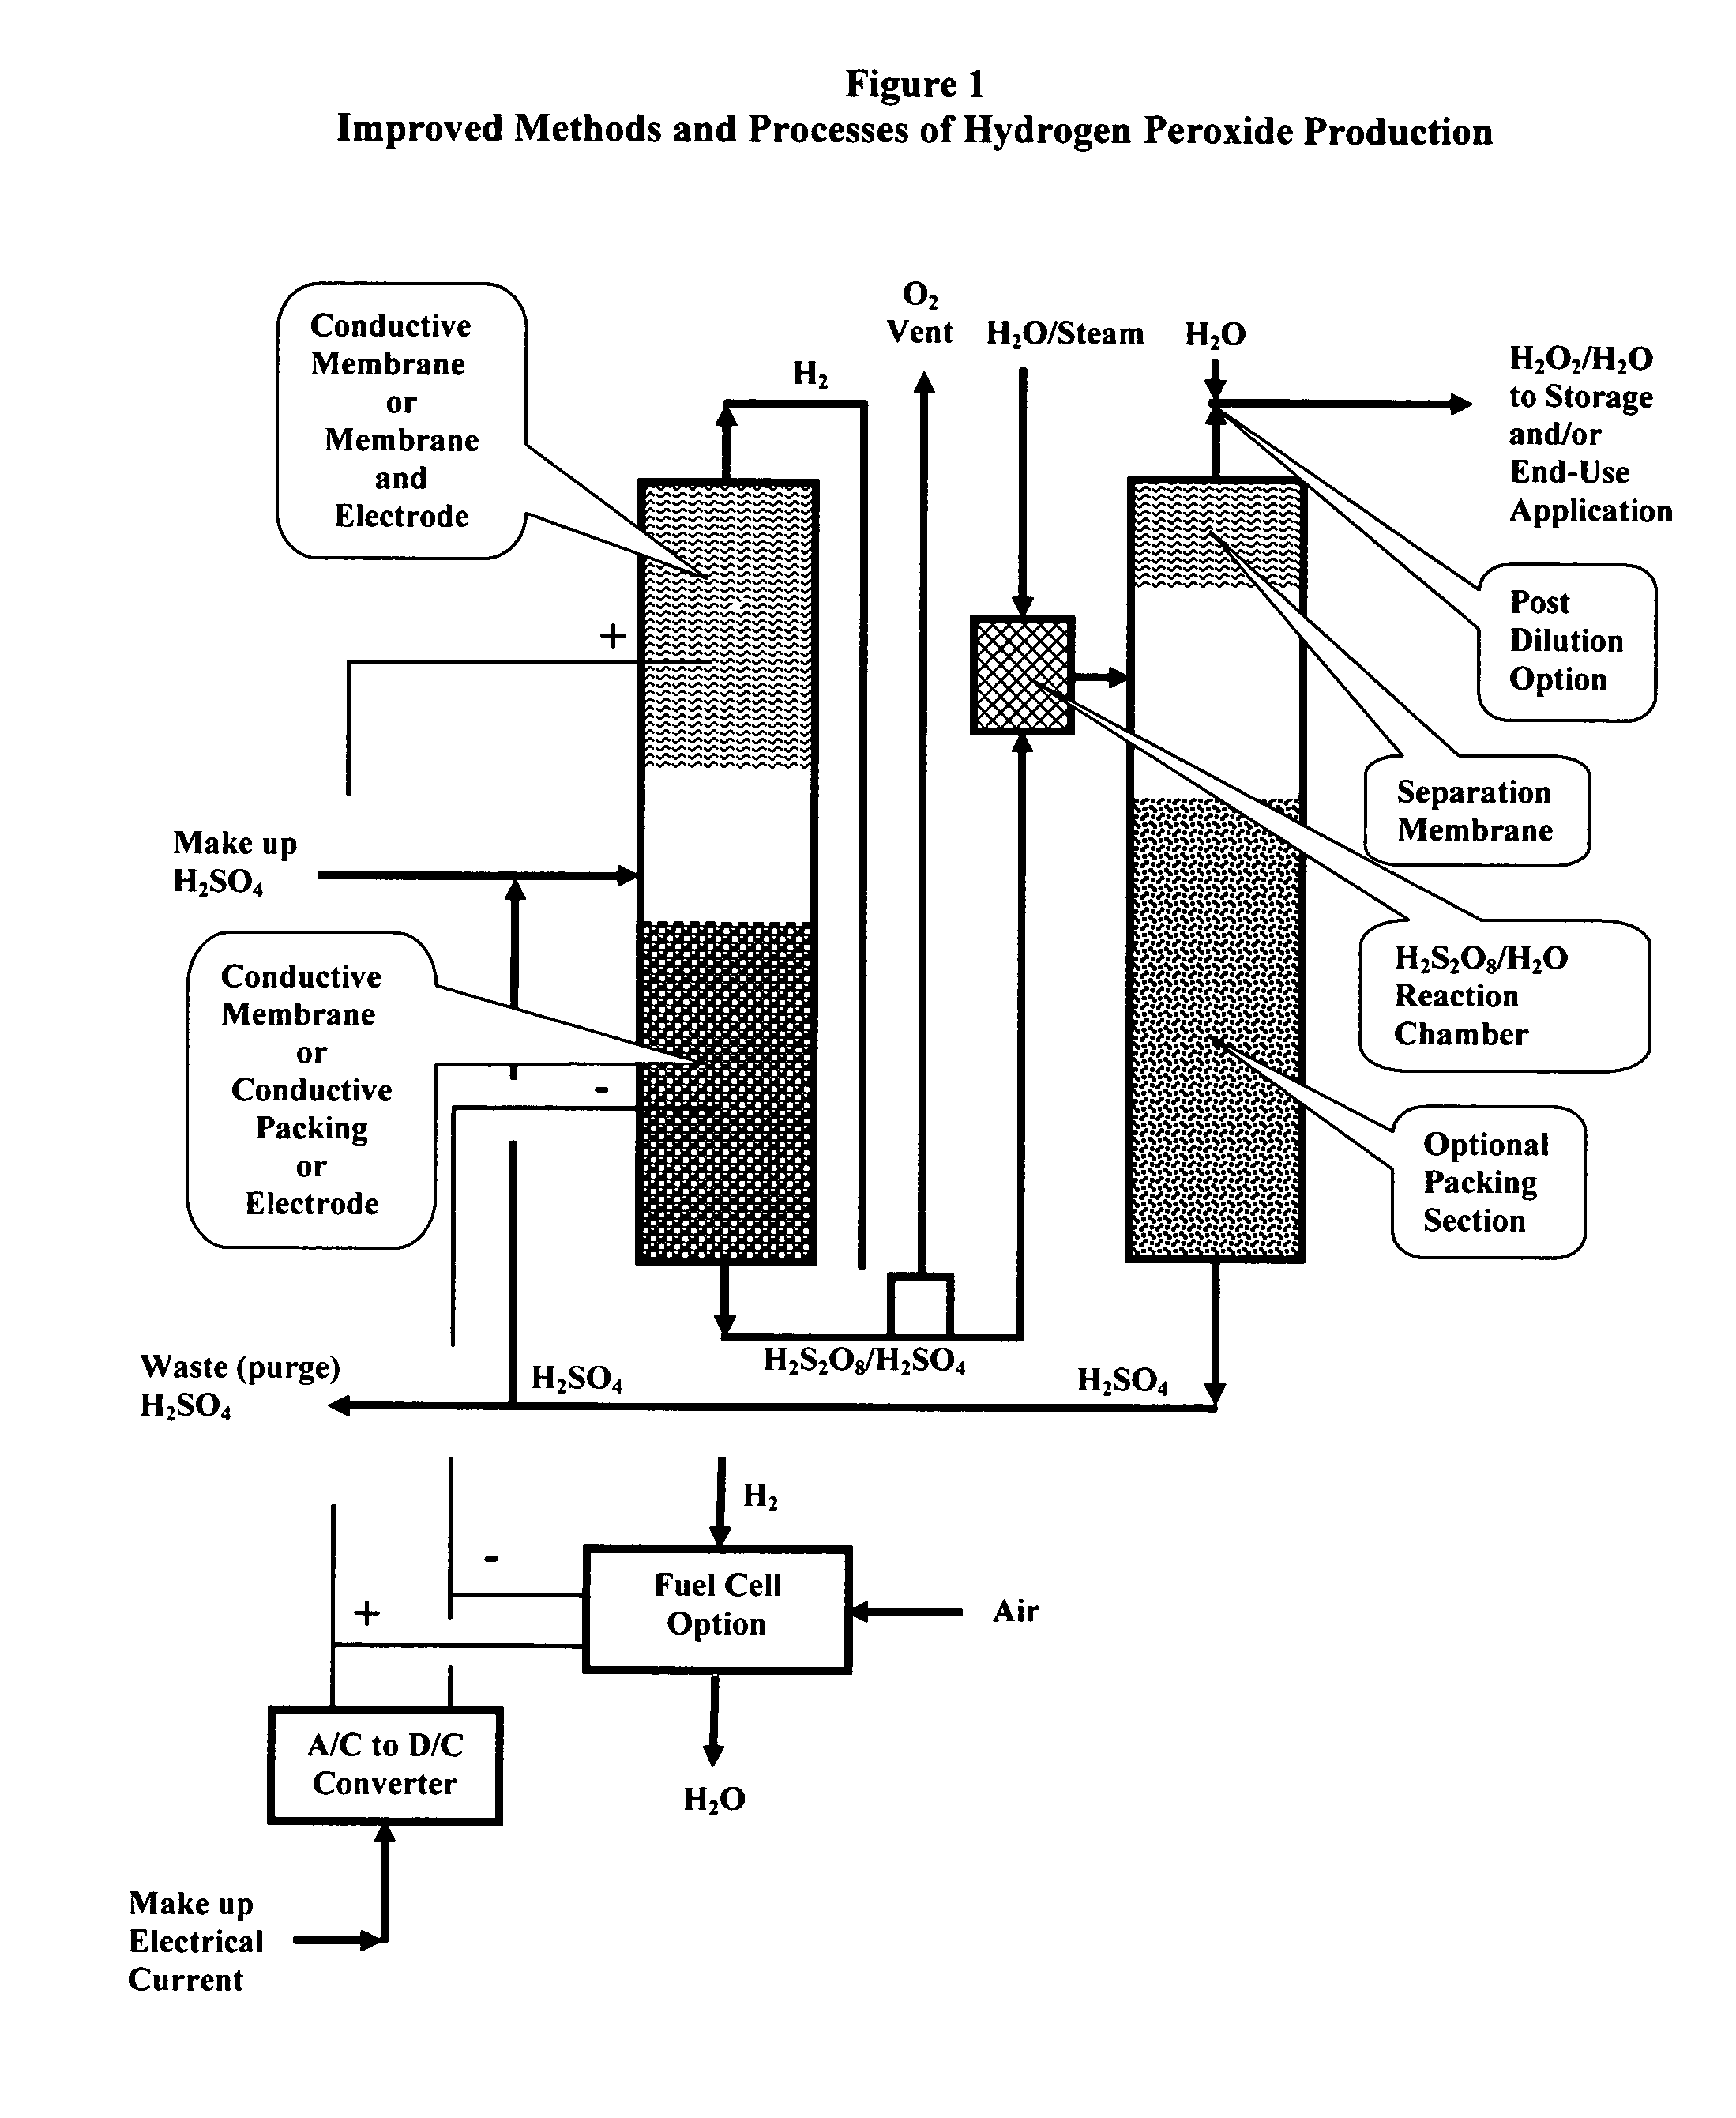 Methods and processes of hydrogen peroxide production